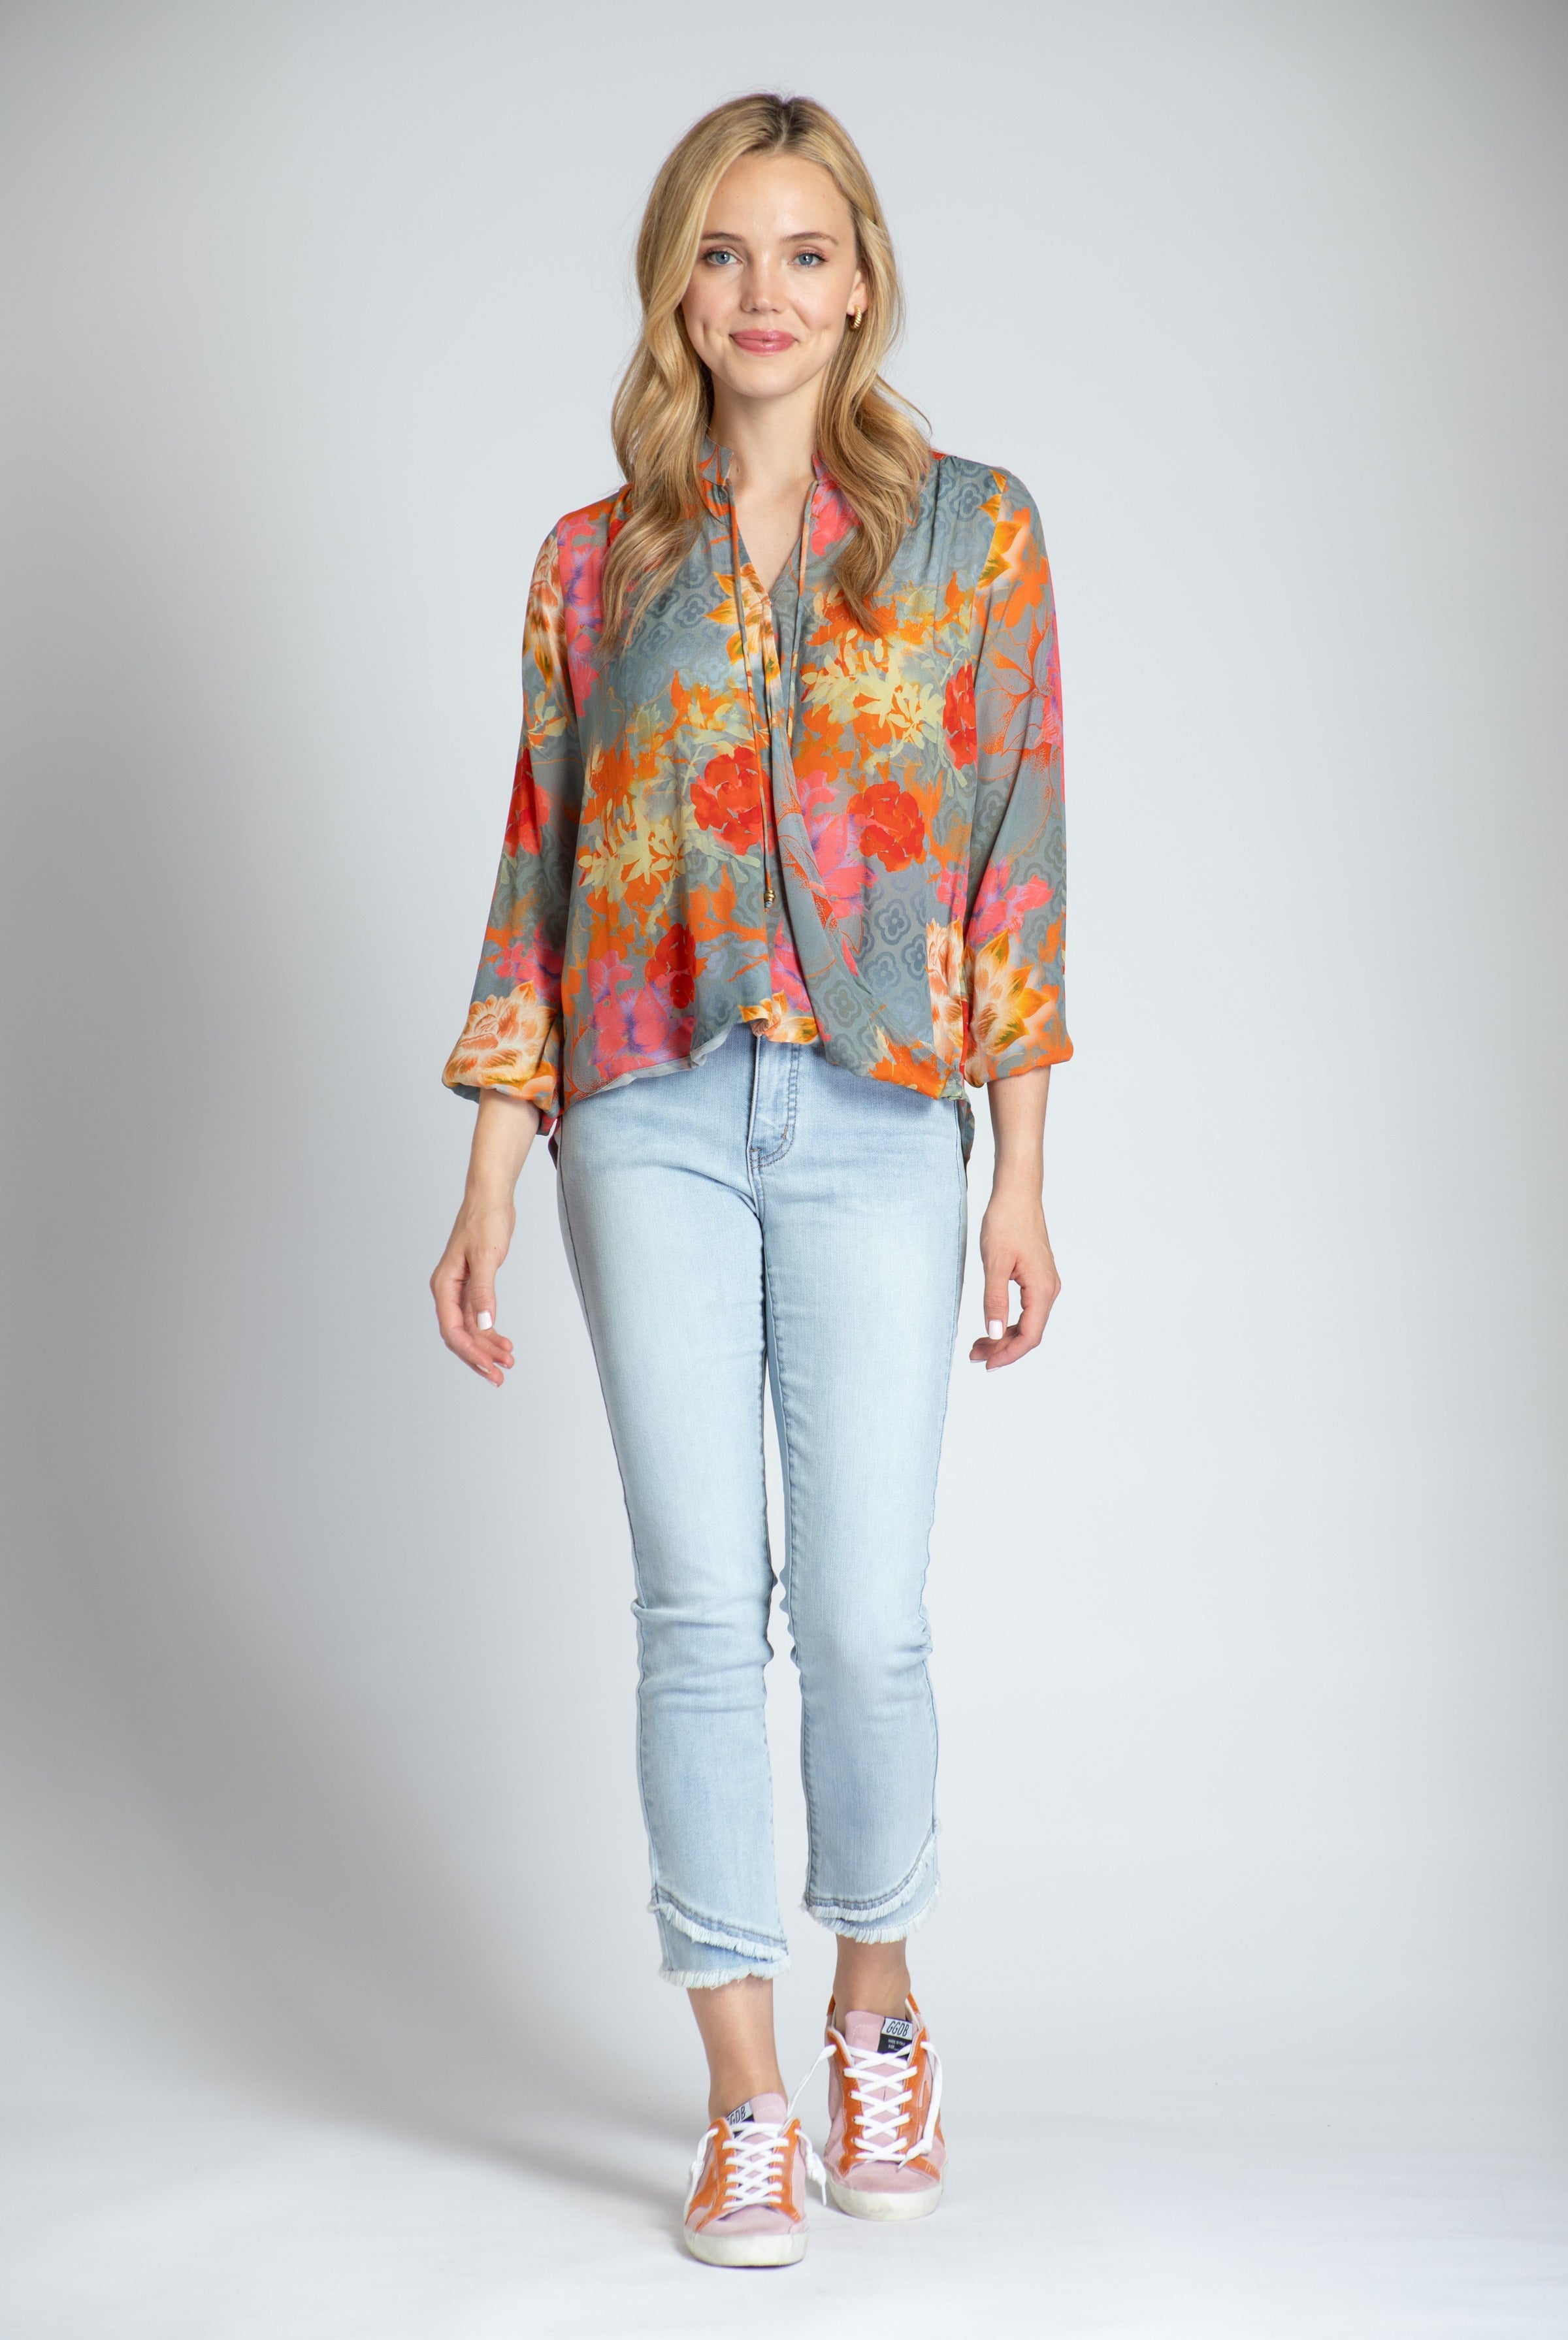 Boho Floral Print - Crossover Top With Tassel